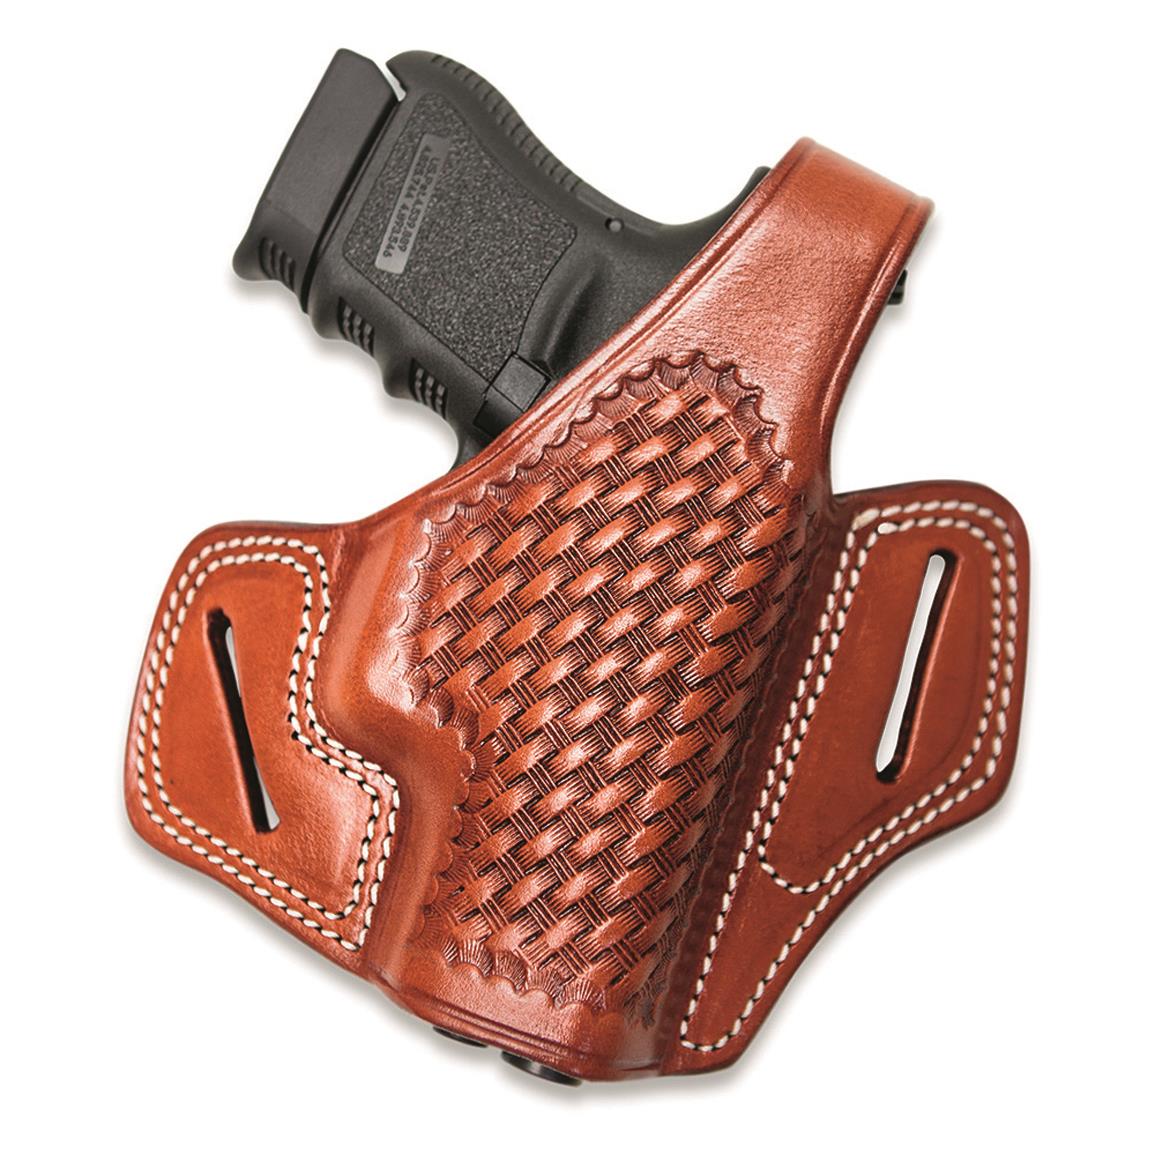 Cebeci Arms Leather Basketweave Pancake Holster, Ruger LCP, Right Hand